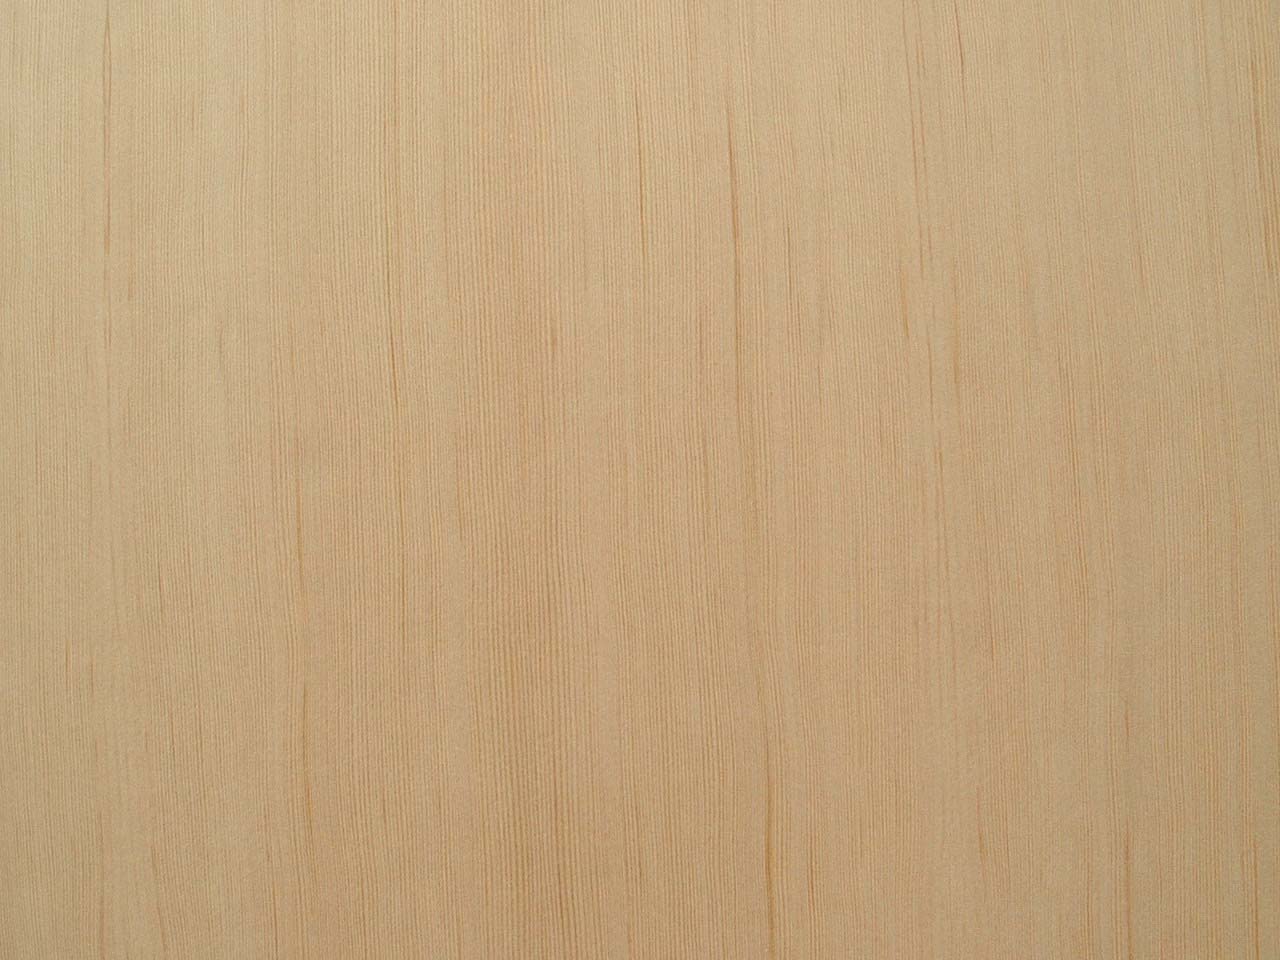 White Birch wood veneer 24" x 24" with paper backer 1/40" thickness A grade 